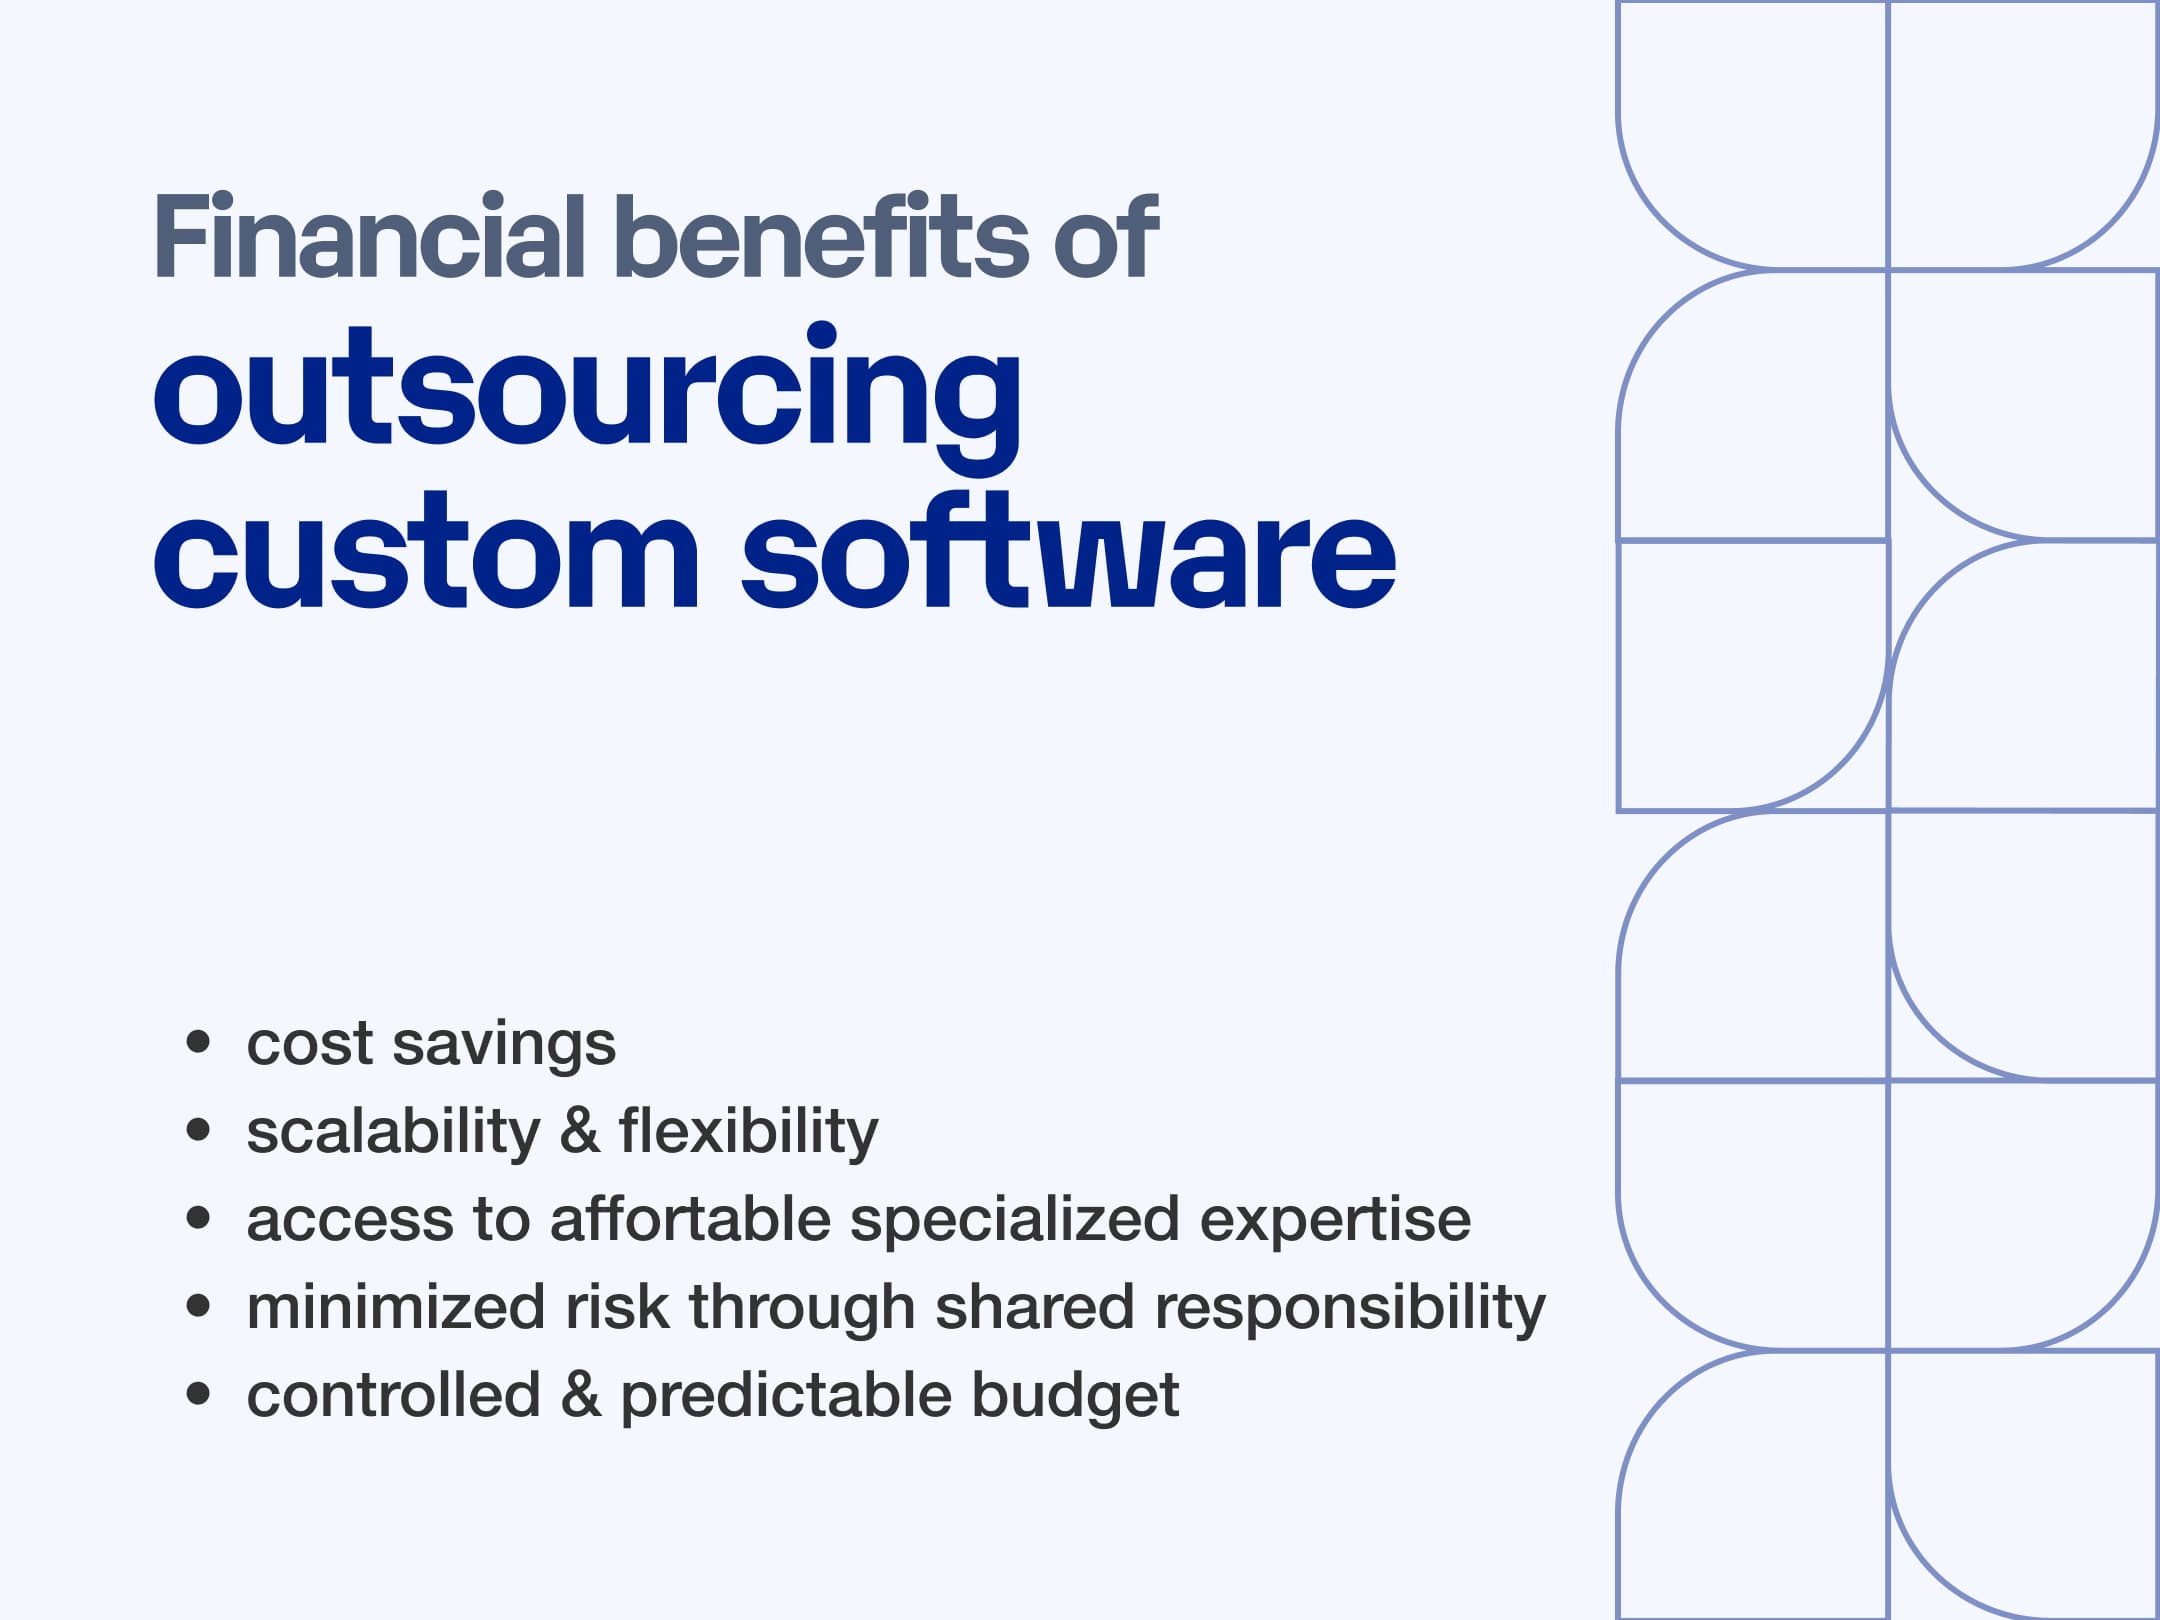 Financial Benefits of Outsourcing Custom Software